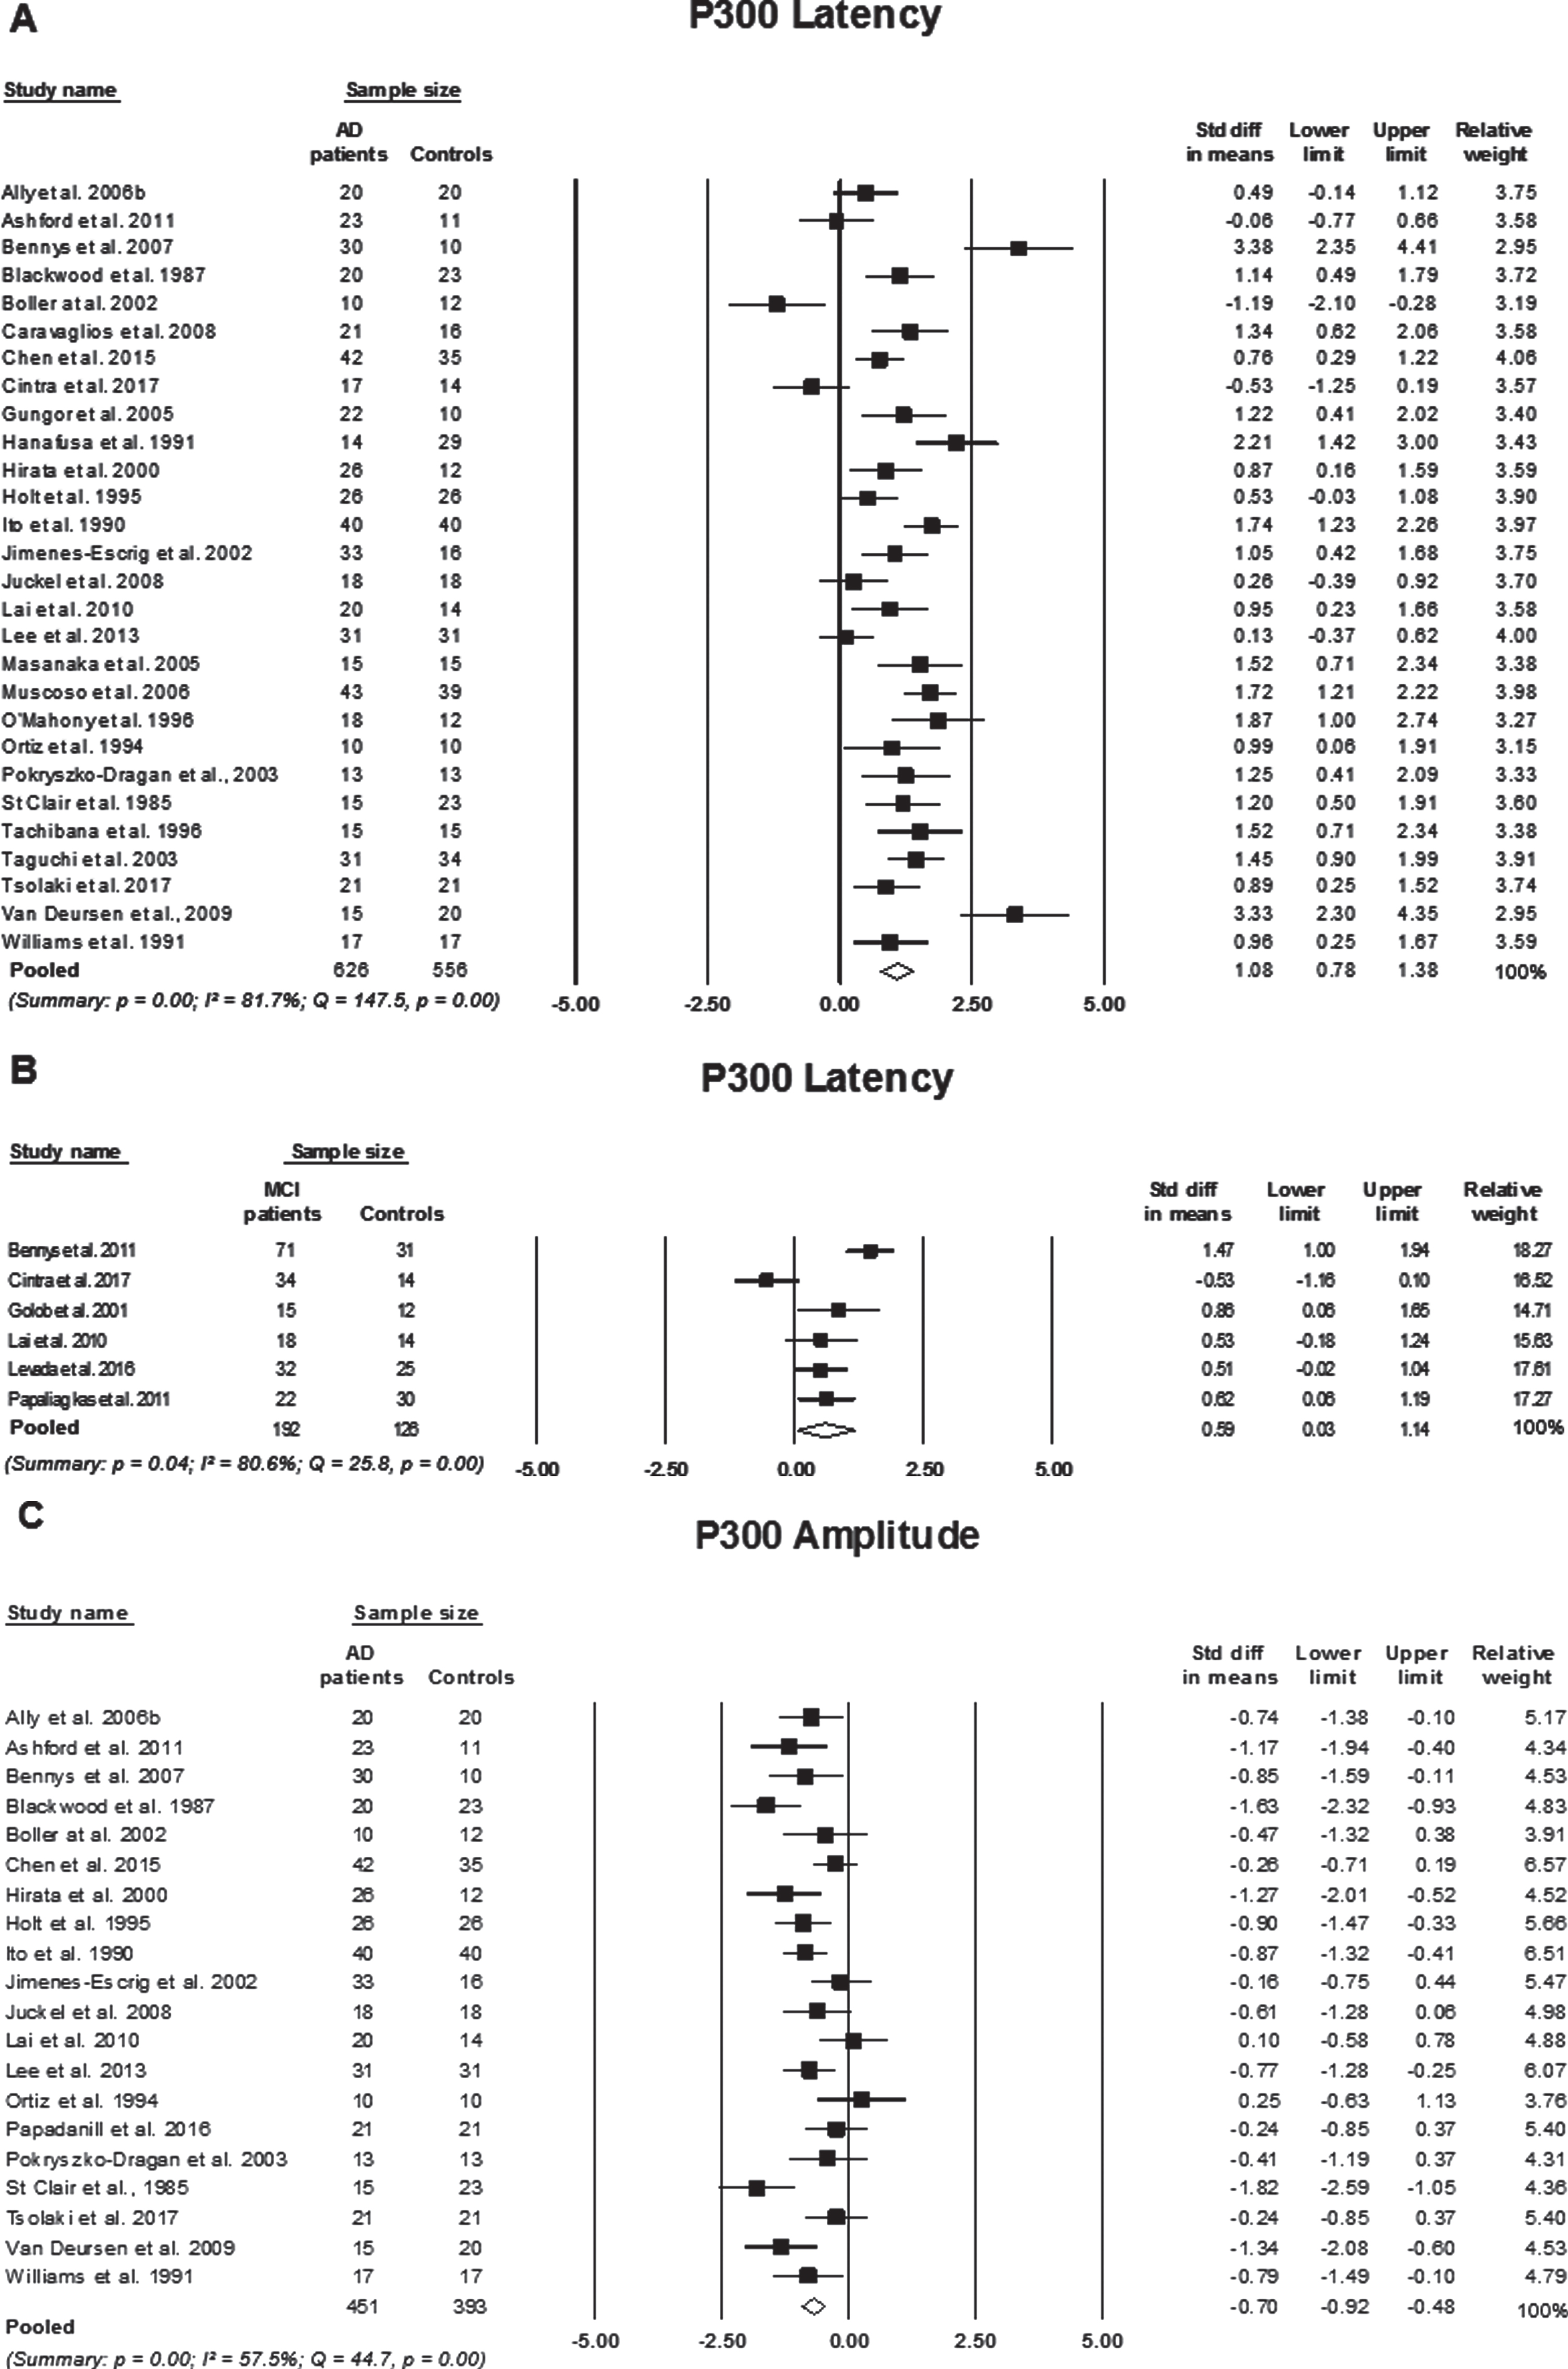 Standard mean difference and pooled estimated of each study included in the meta-analyses of P300 elicited using an active two-tone oddball paradigm. A) comparing P300 latency between participants with Alzheimer’s disease (AD) and controls, B) comparing P300 latency between participants with mild cognitive impairment (MCI) to controls, and C) comparing P300 amplitude between participants with AD to controls. Summary includes: p = significance level; I2 = percentage of heterogeneity; Q = Cochrane’s Q. The horizontal lines represent the 95%confidence interval for each computed standard mean difference. Note: weights are from random effects analysis.